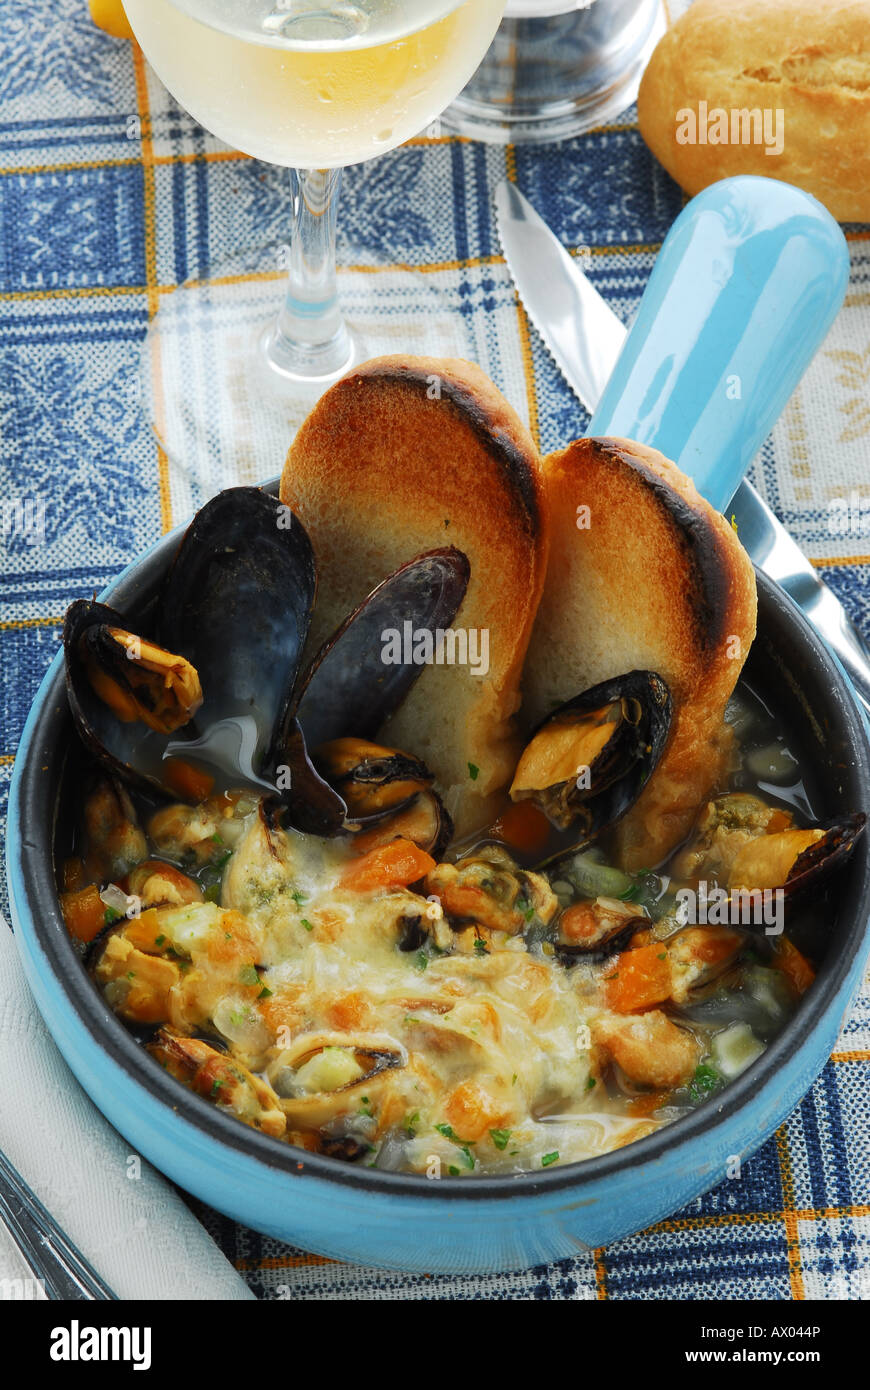 Mussels soup - Cucina Istriana - Istrian kitchen Stock Photo